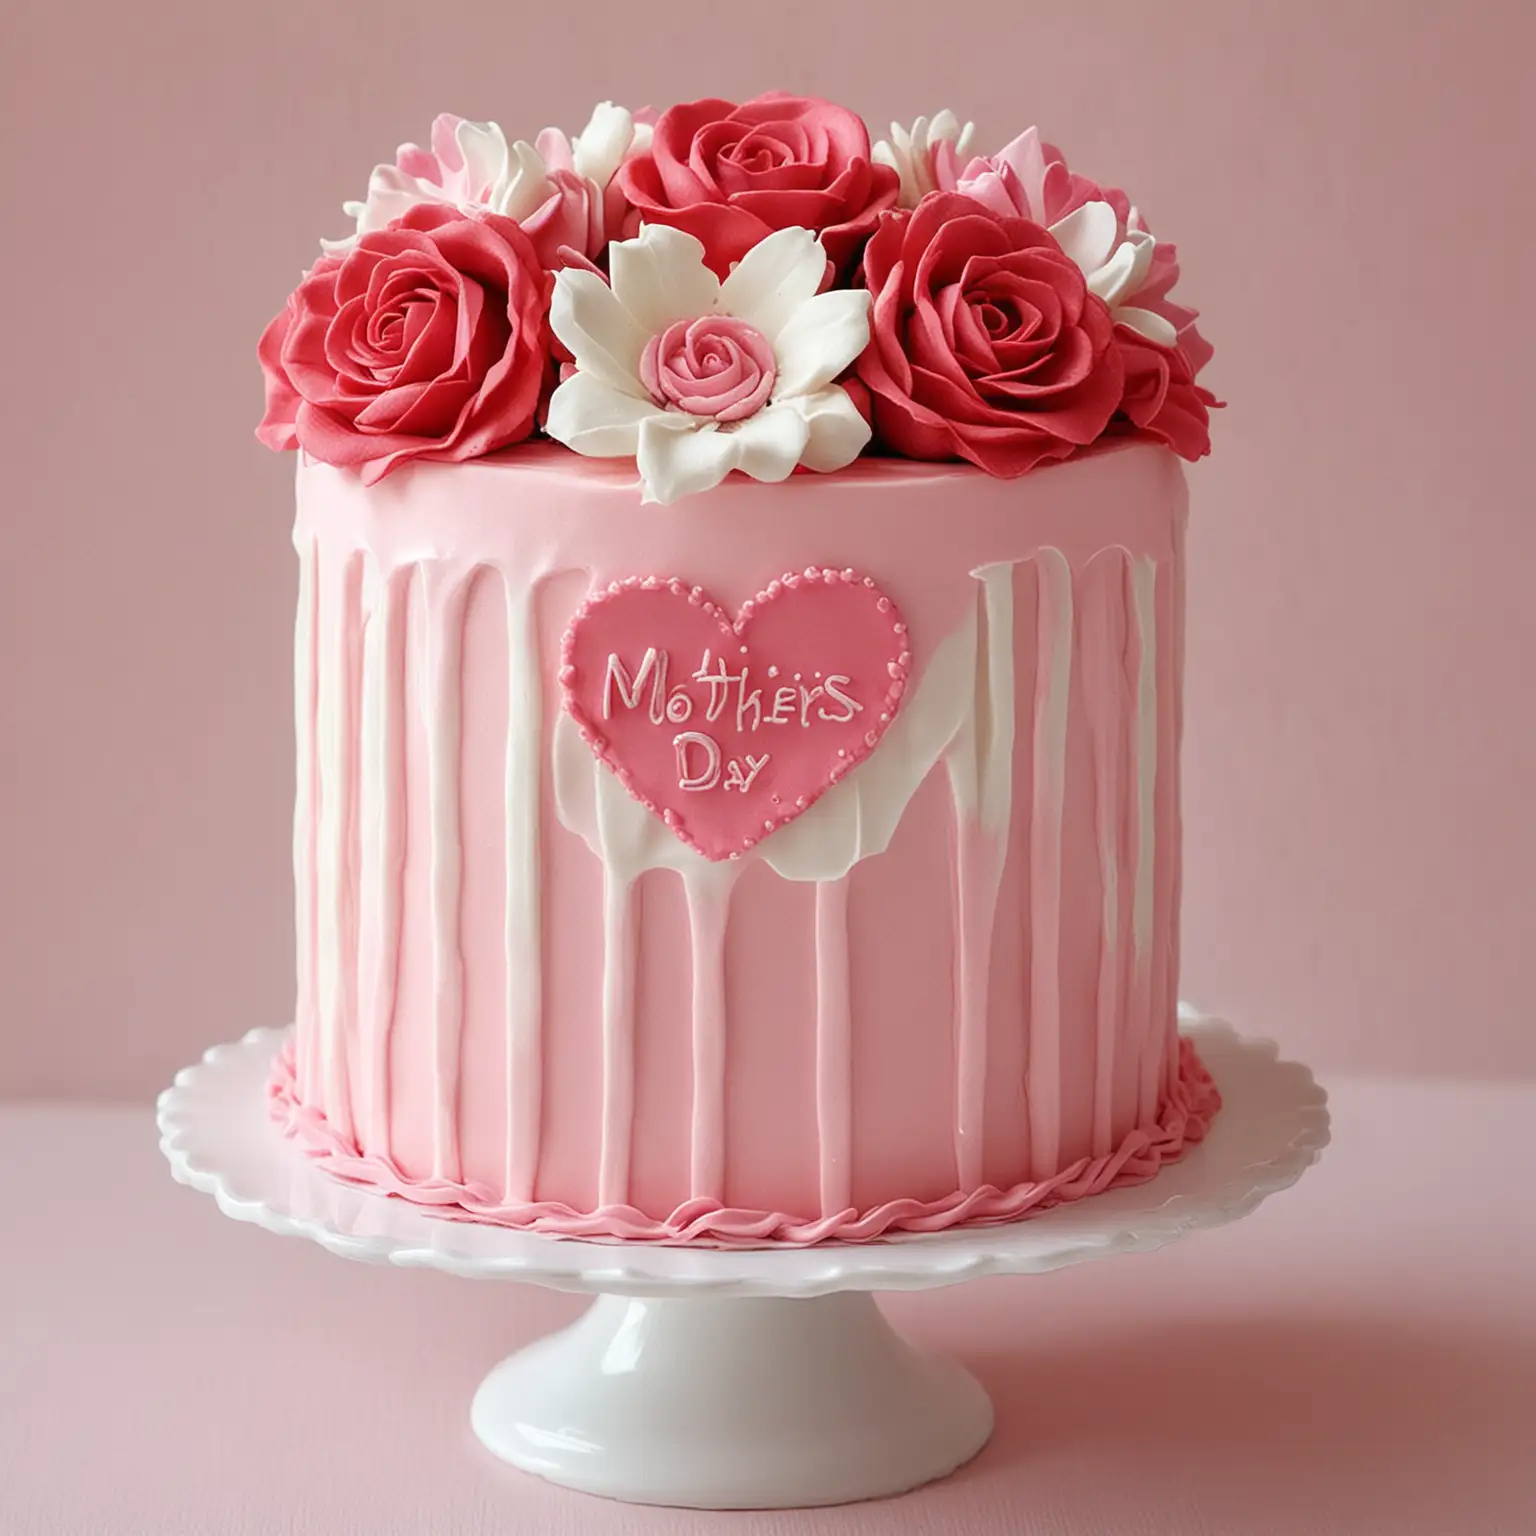 Adorable Mothers Day Cake Ideas in Red White and Pink Theme